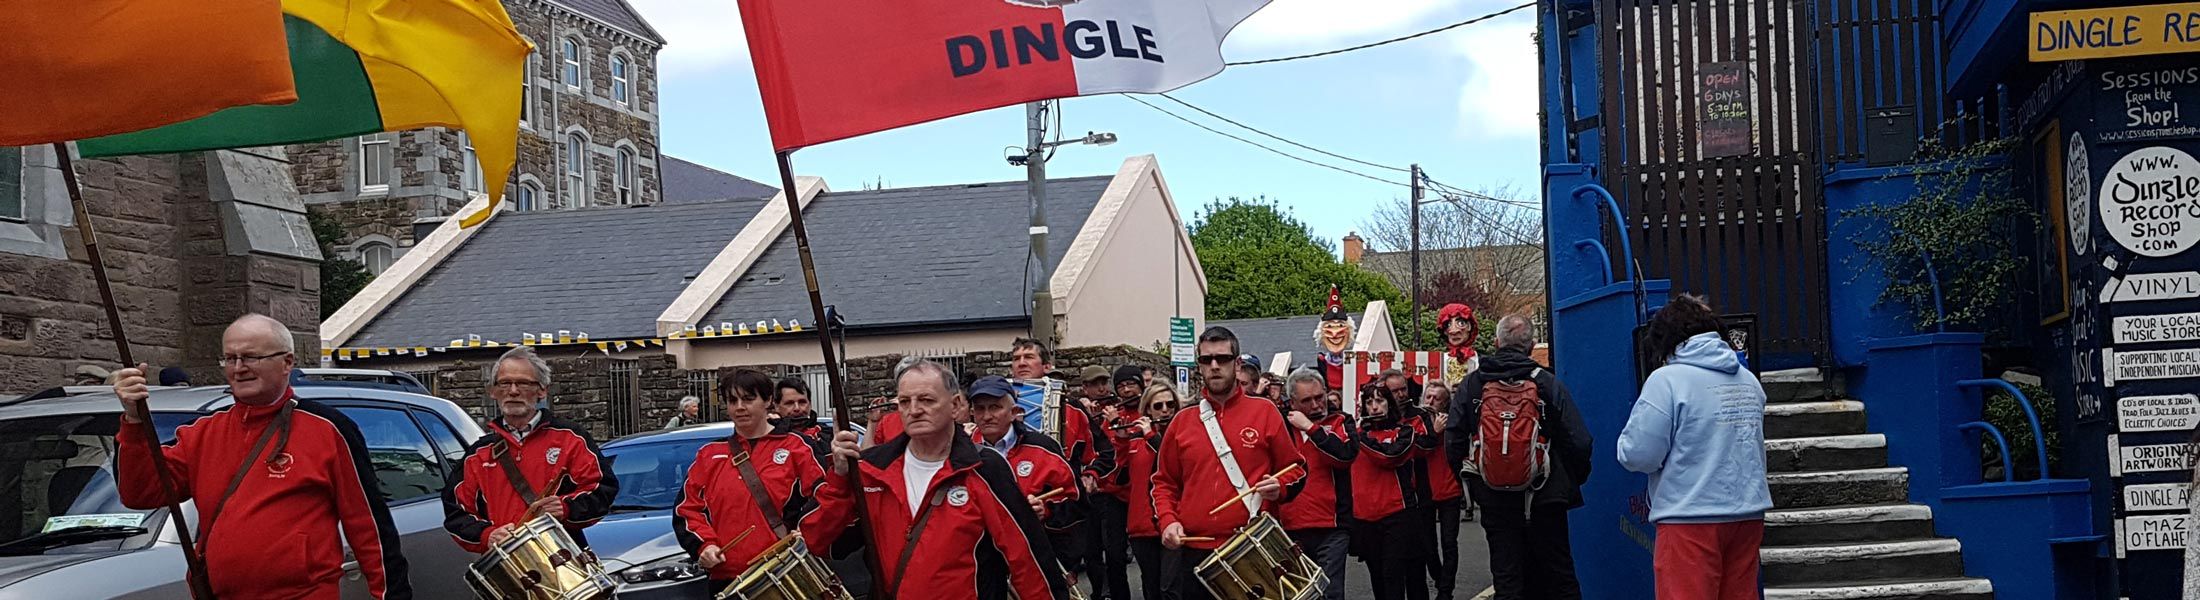 Dingle Fife and Drum band march around Dingle town